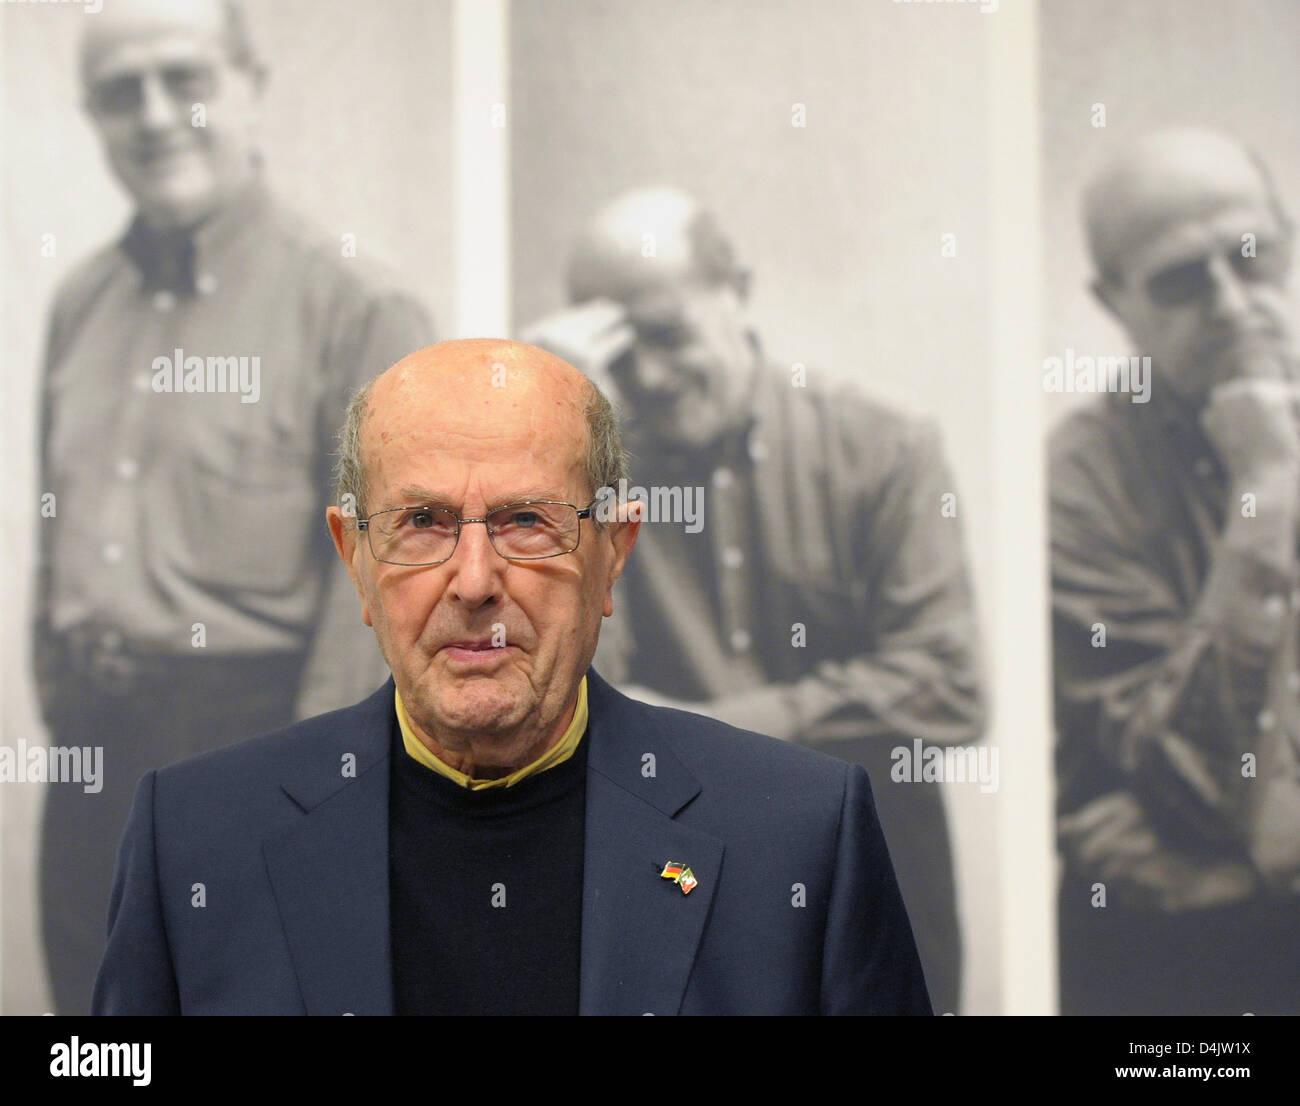 Portuguese director Manoel de Oliveira stands in front of two of his photos during the opening press conference for an exhibition on the occasion of his 100th birthday at Berlin?s Academy of Arts (?Akademie der Kuenste?), Germany, 3 March 2009. The exhibition runs until 29 March 2009. Photo: Soeren Stache Stock Photo